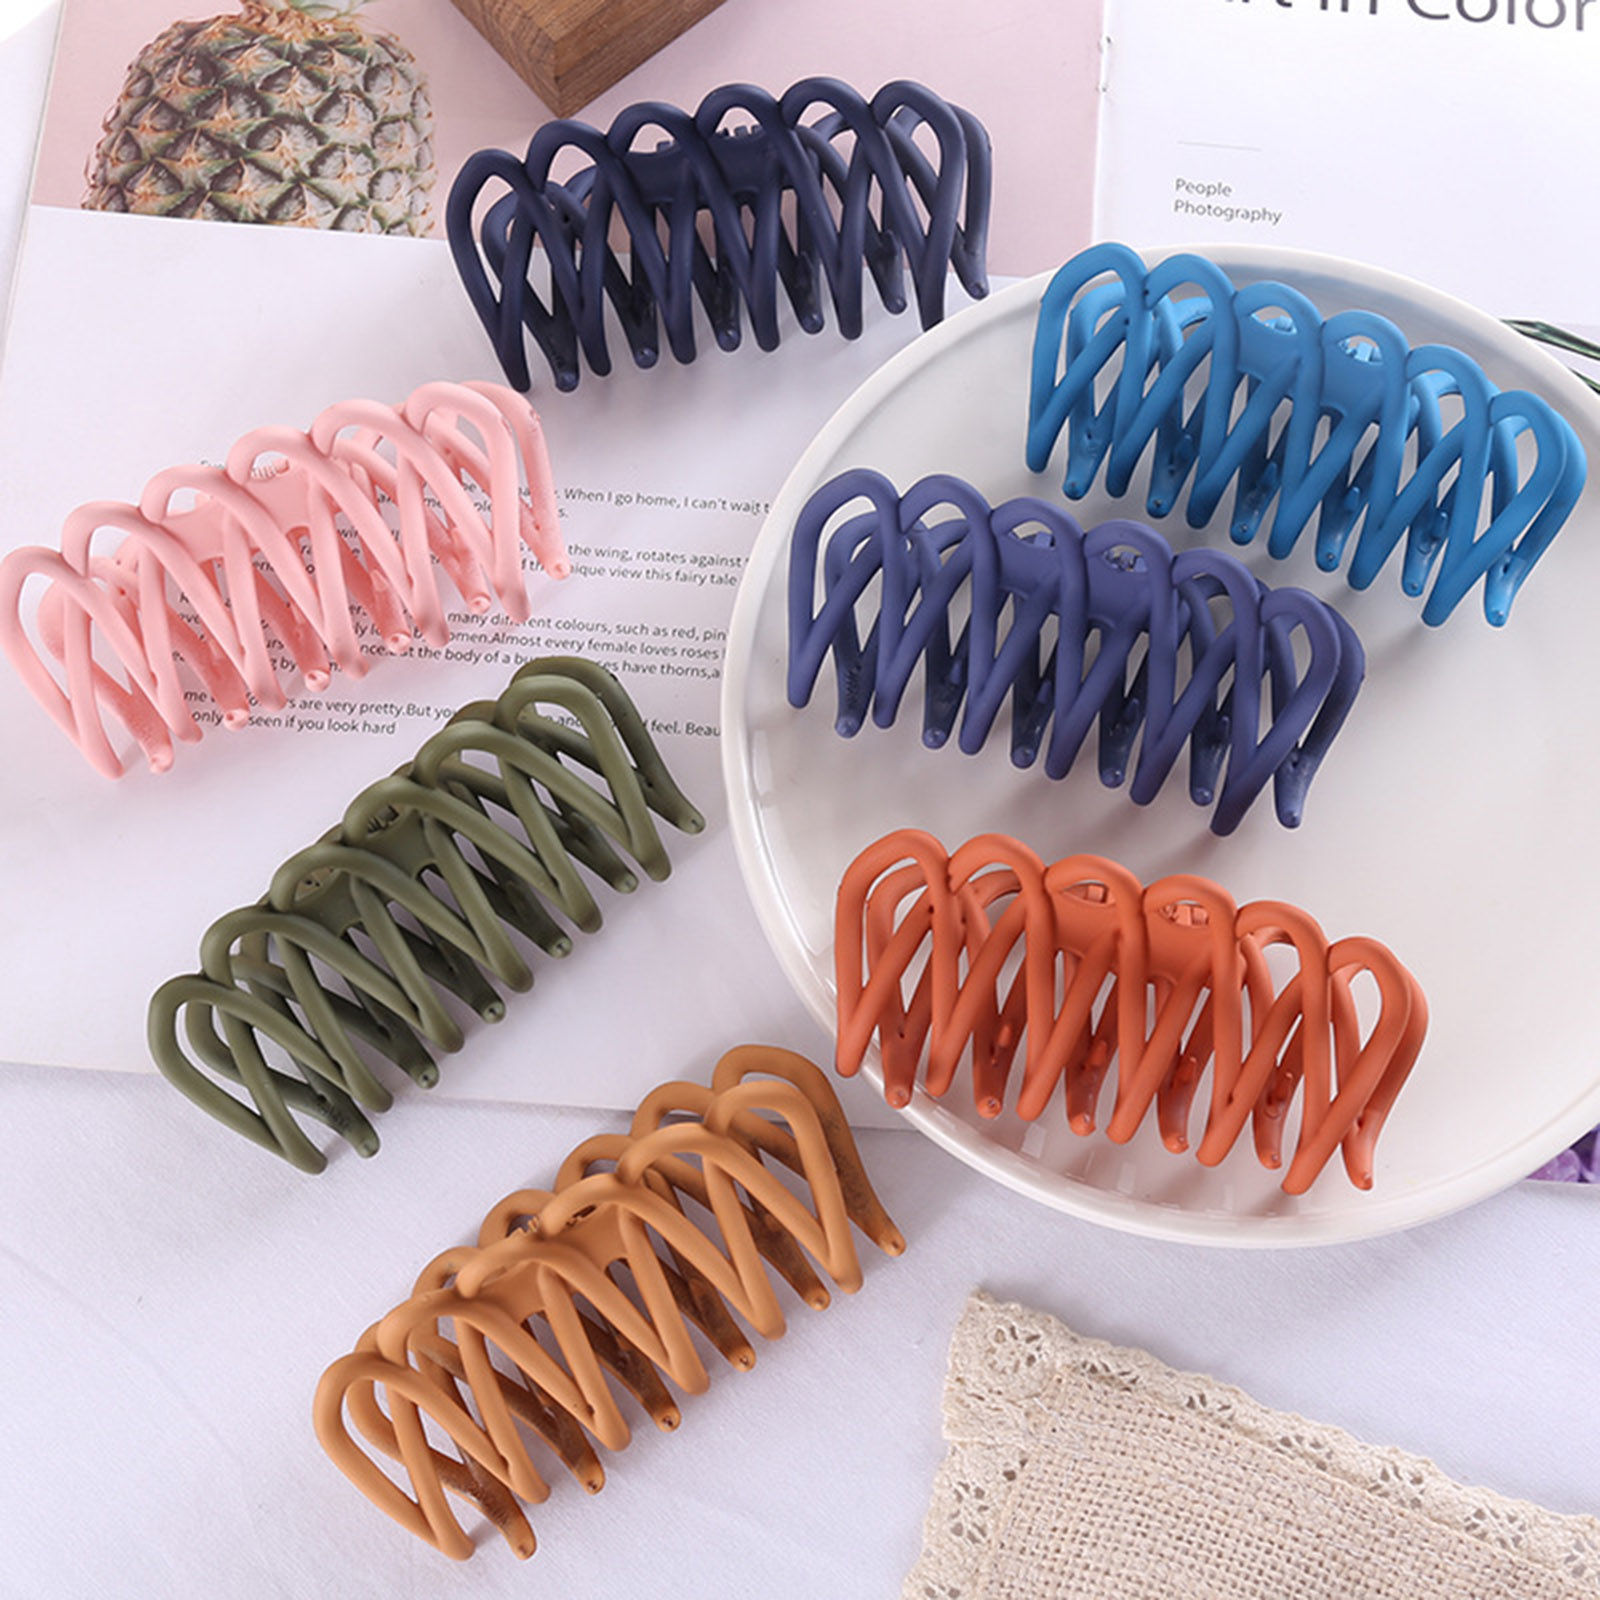 Picture of Acrylic Hair Clips Multicolor Geometric Frosted 1 Piece